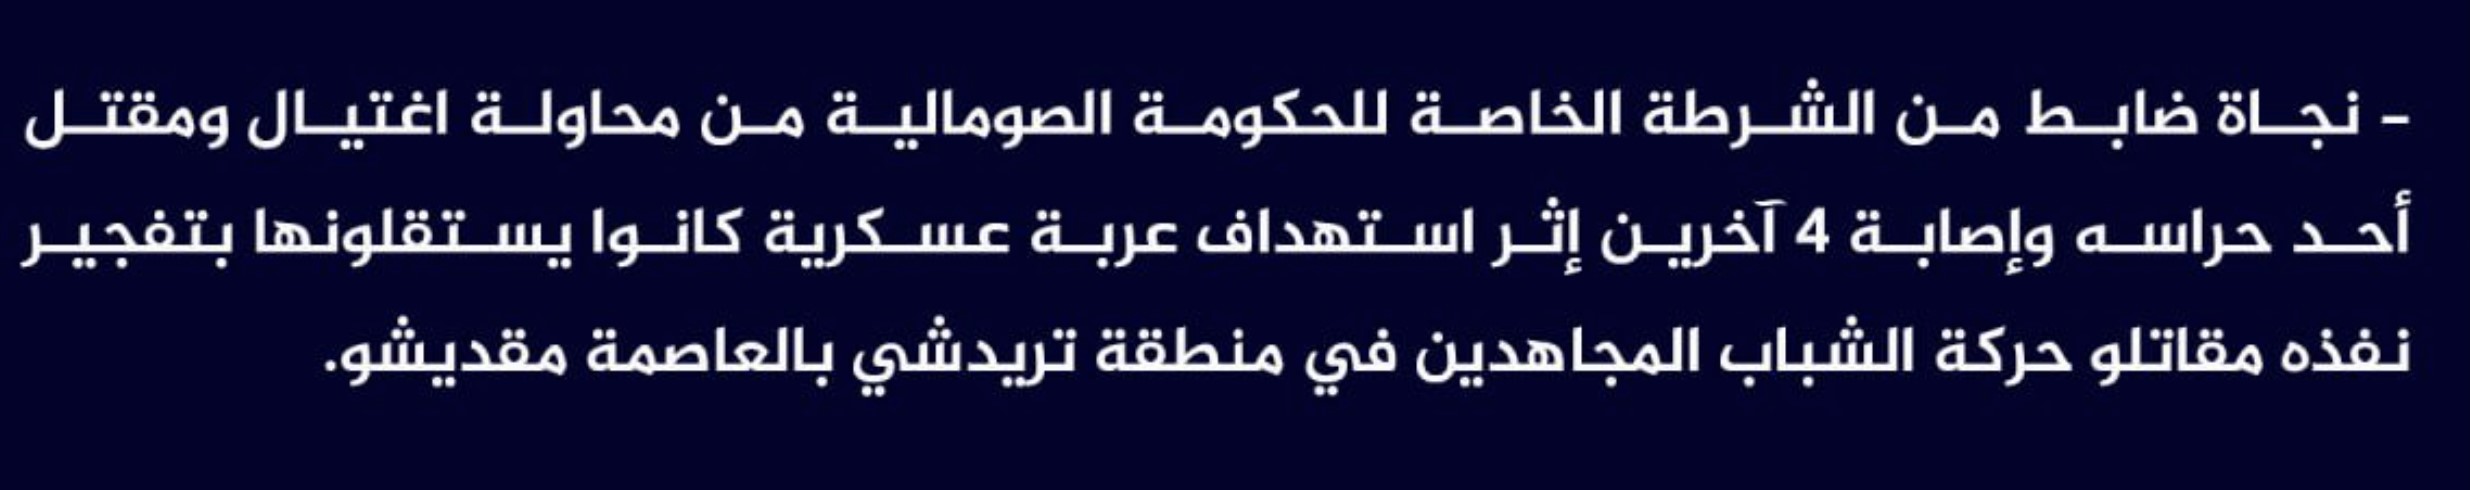 (Claim) al-Shabaab: A Somalian Special Police Officer Survived an Assassination Attempt that Killed One of His Guards and Injured Four Others in an IED Attack That Targeted His Military Vehicle in Trichy District, Mogadishu, Somalia - 21 June 2023